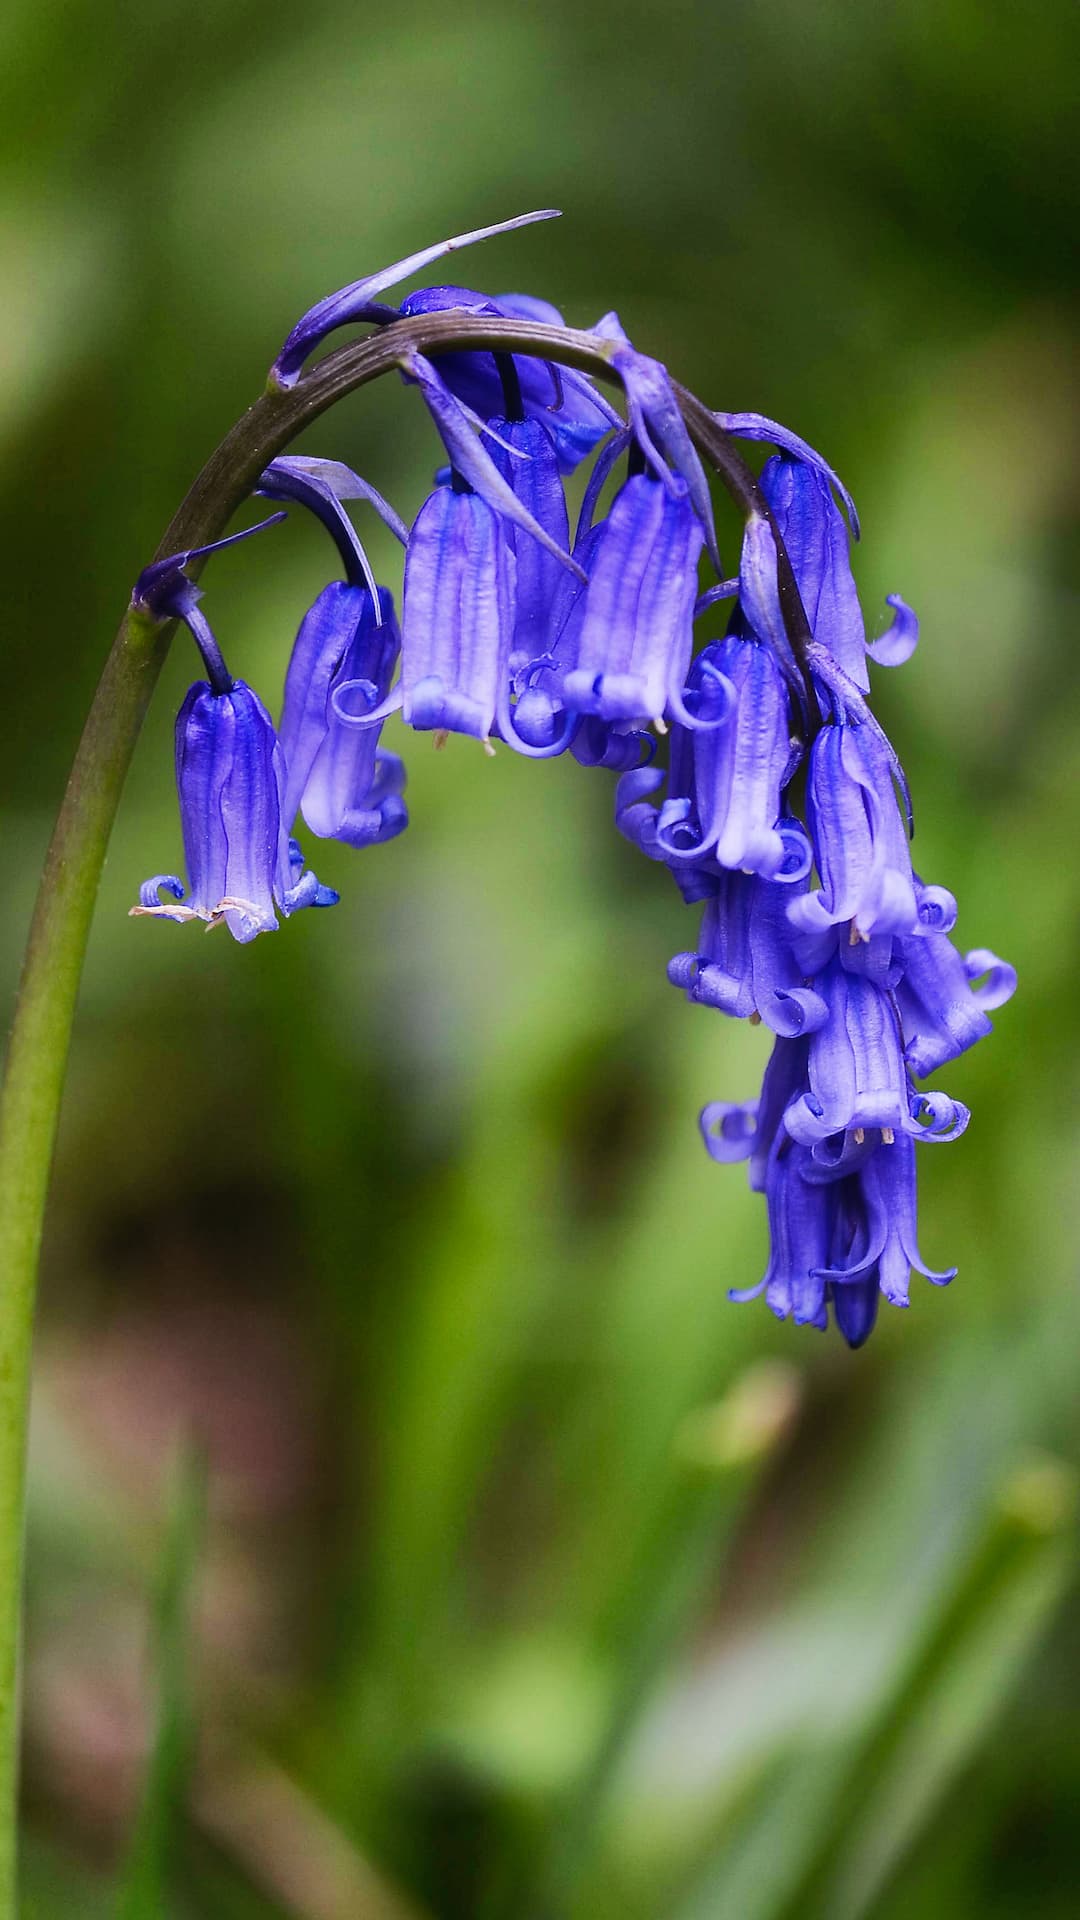 Hyacinthoides non-scripta (Common Bluebell), taken at Ashridge Forest, Hertfordshire, UK by Michael Maggs, licensed CC-BY-SA-3.0